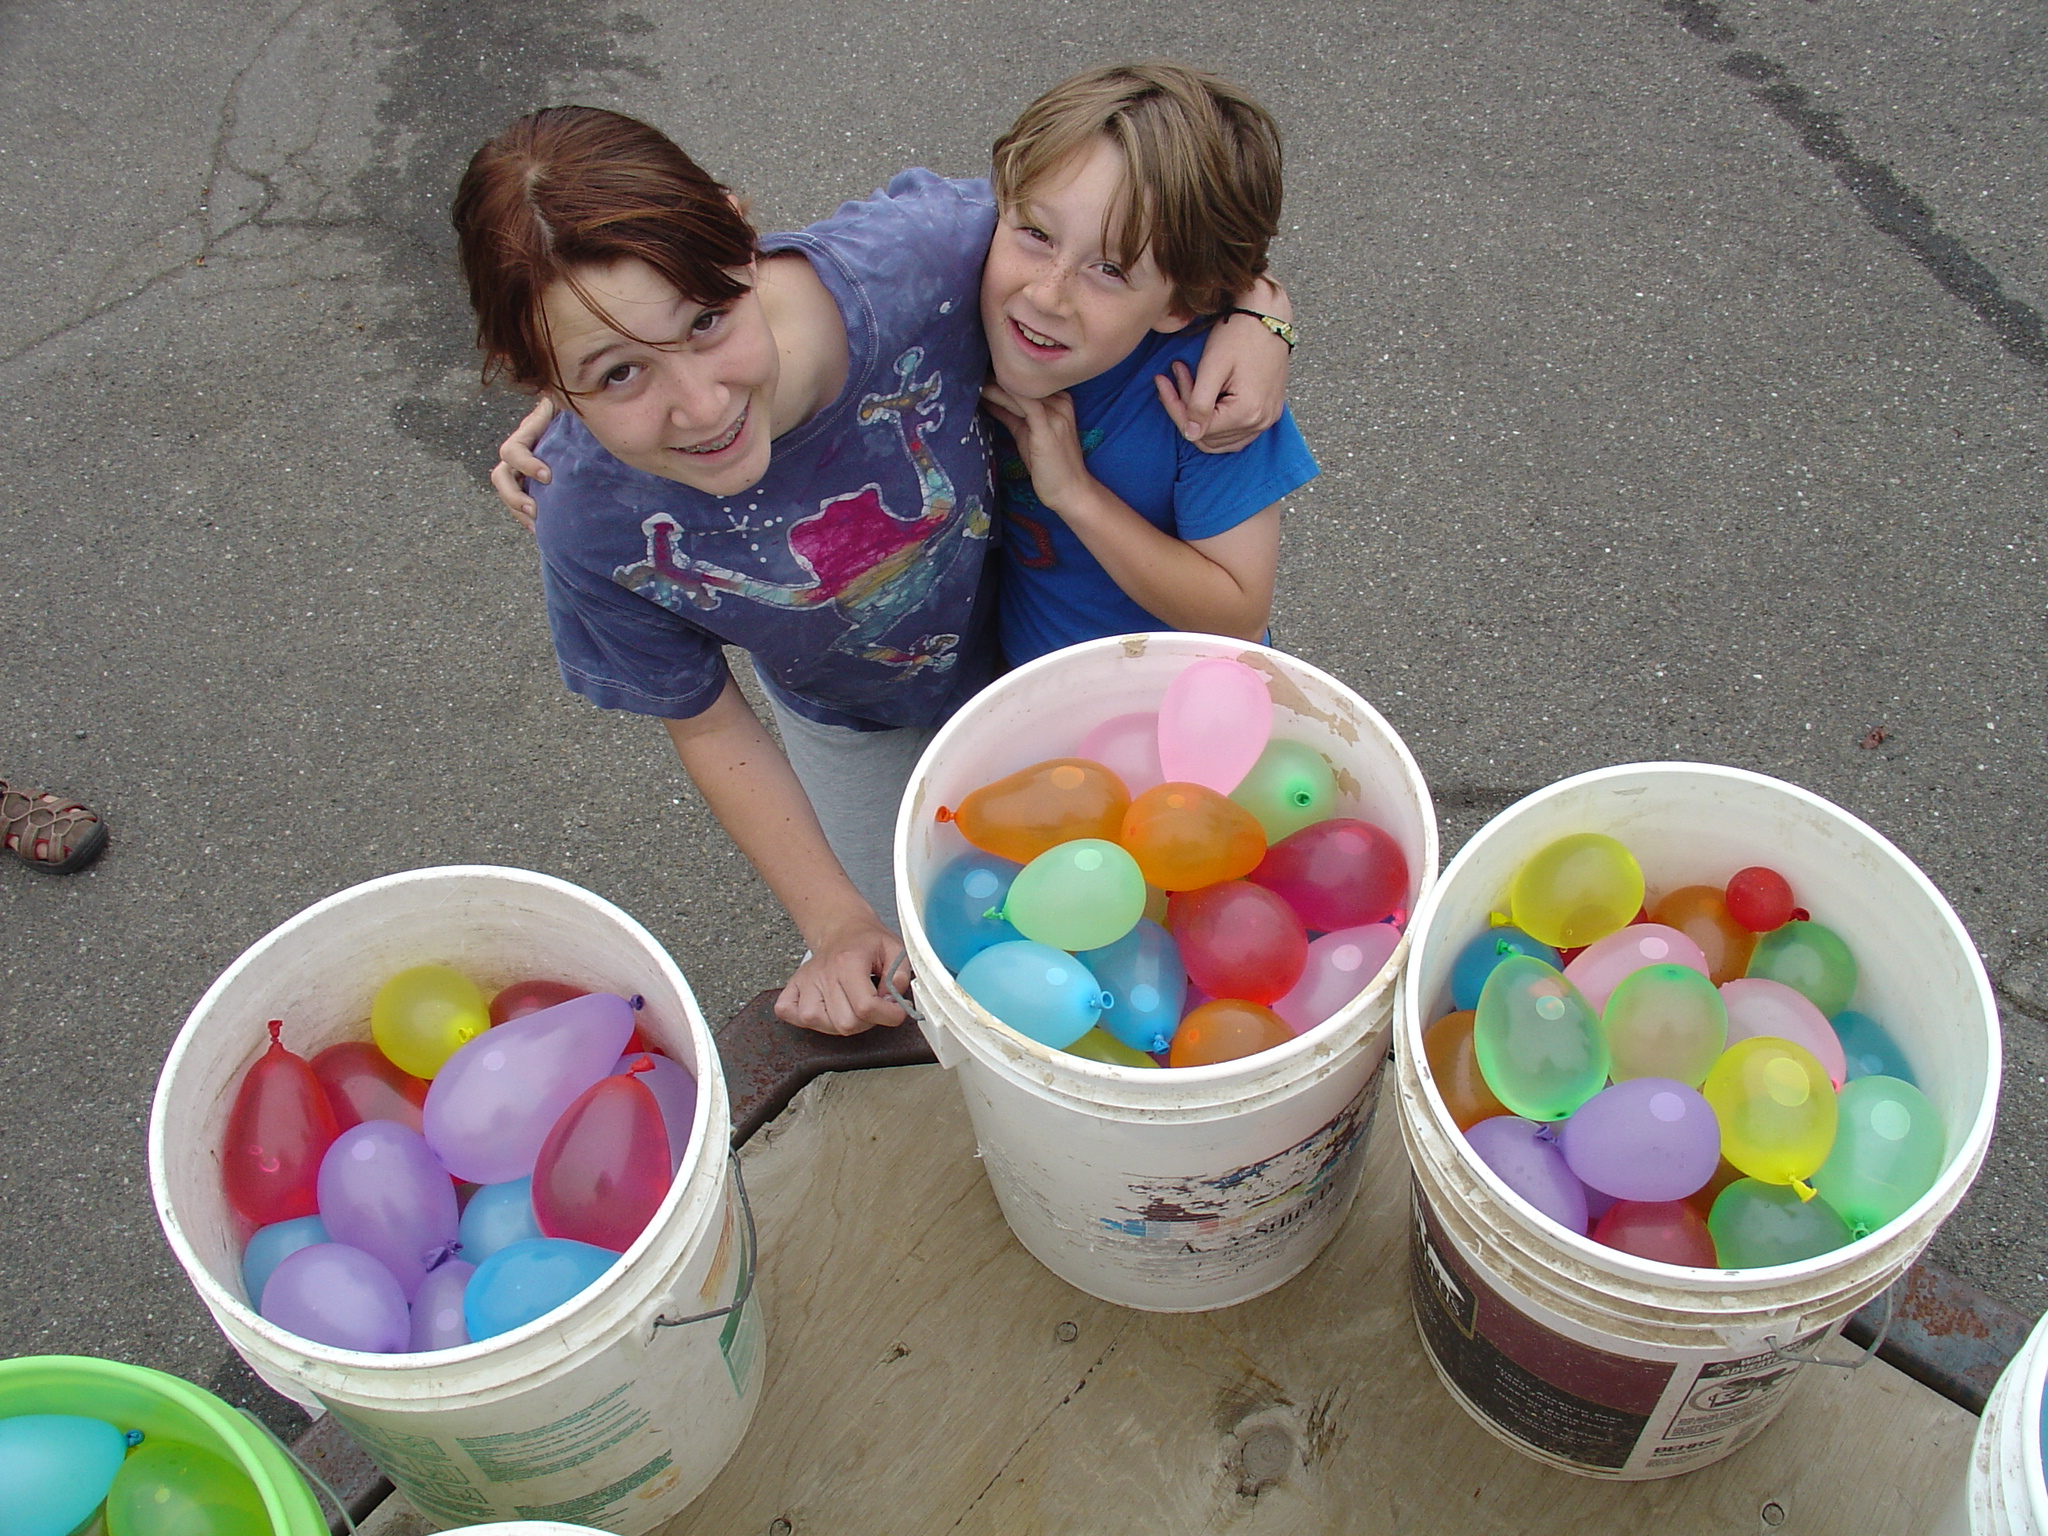 5 Cool Water Balloon Games And Fight Ideas 